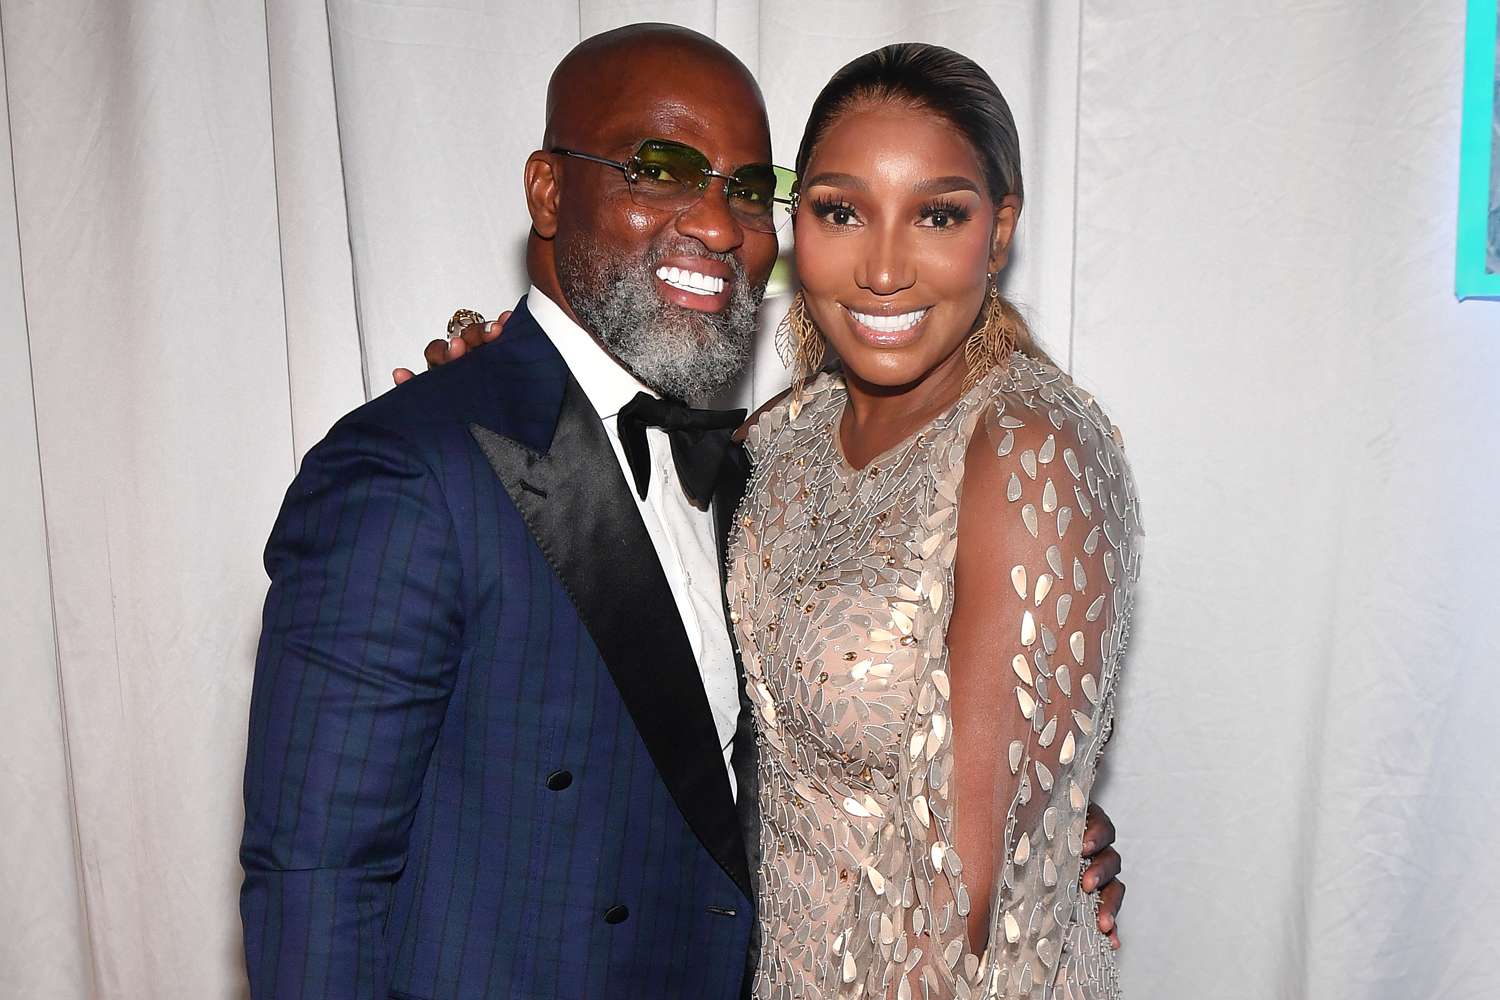 NeNe Leakes Says She ‘Would Never’ Steal Someone’s Husband After Her Boyfriend’s Wife Files Lawsuit Accusing Her of Breaking Up Their Marriage